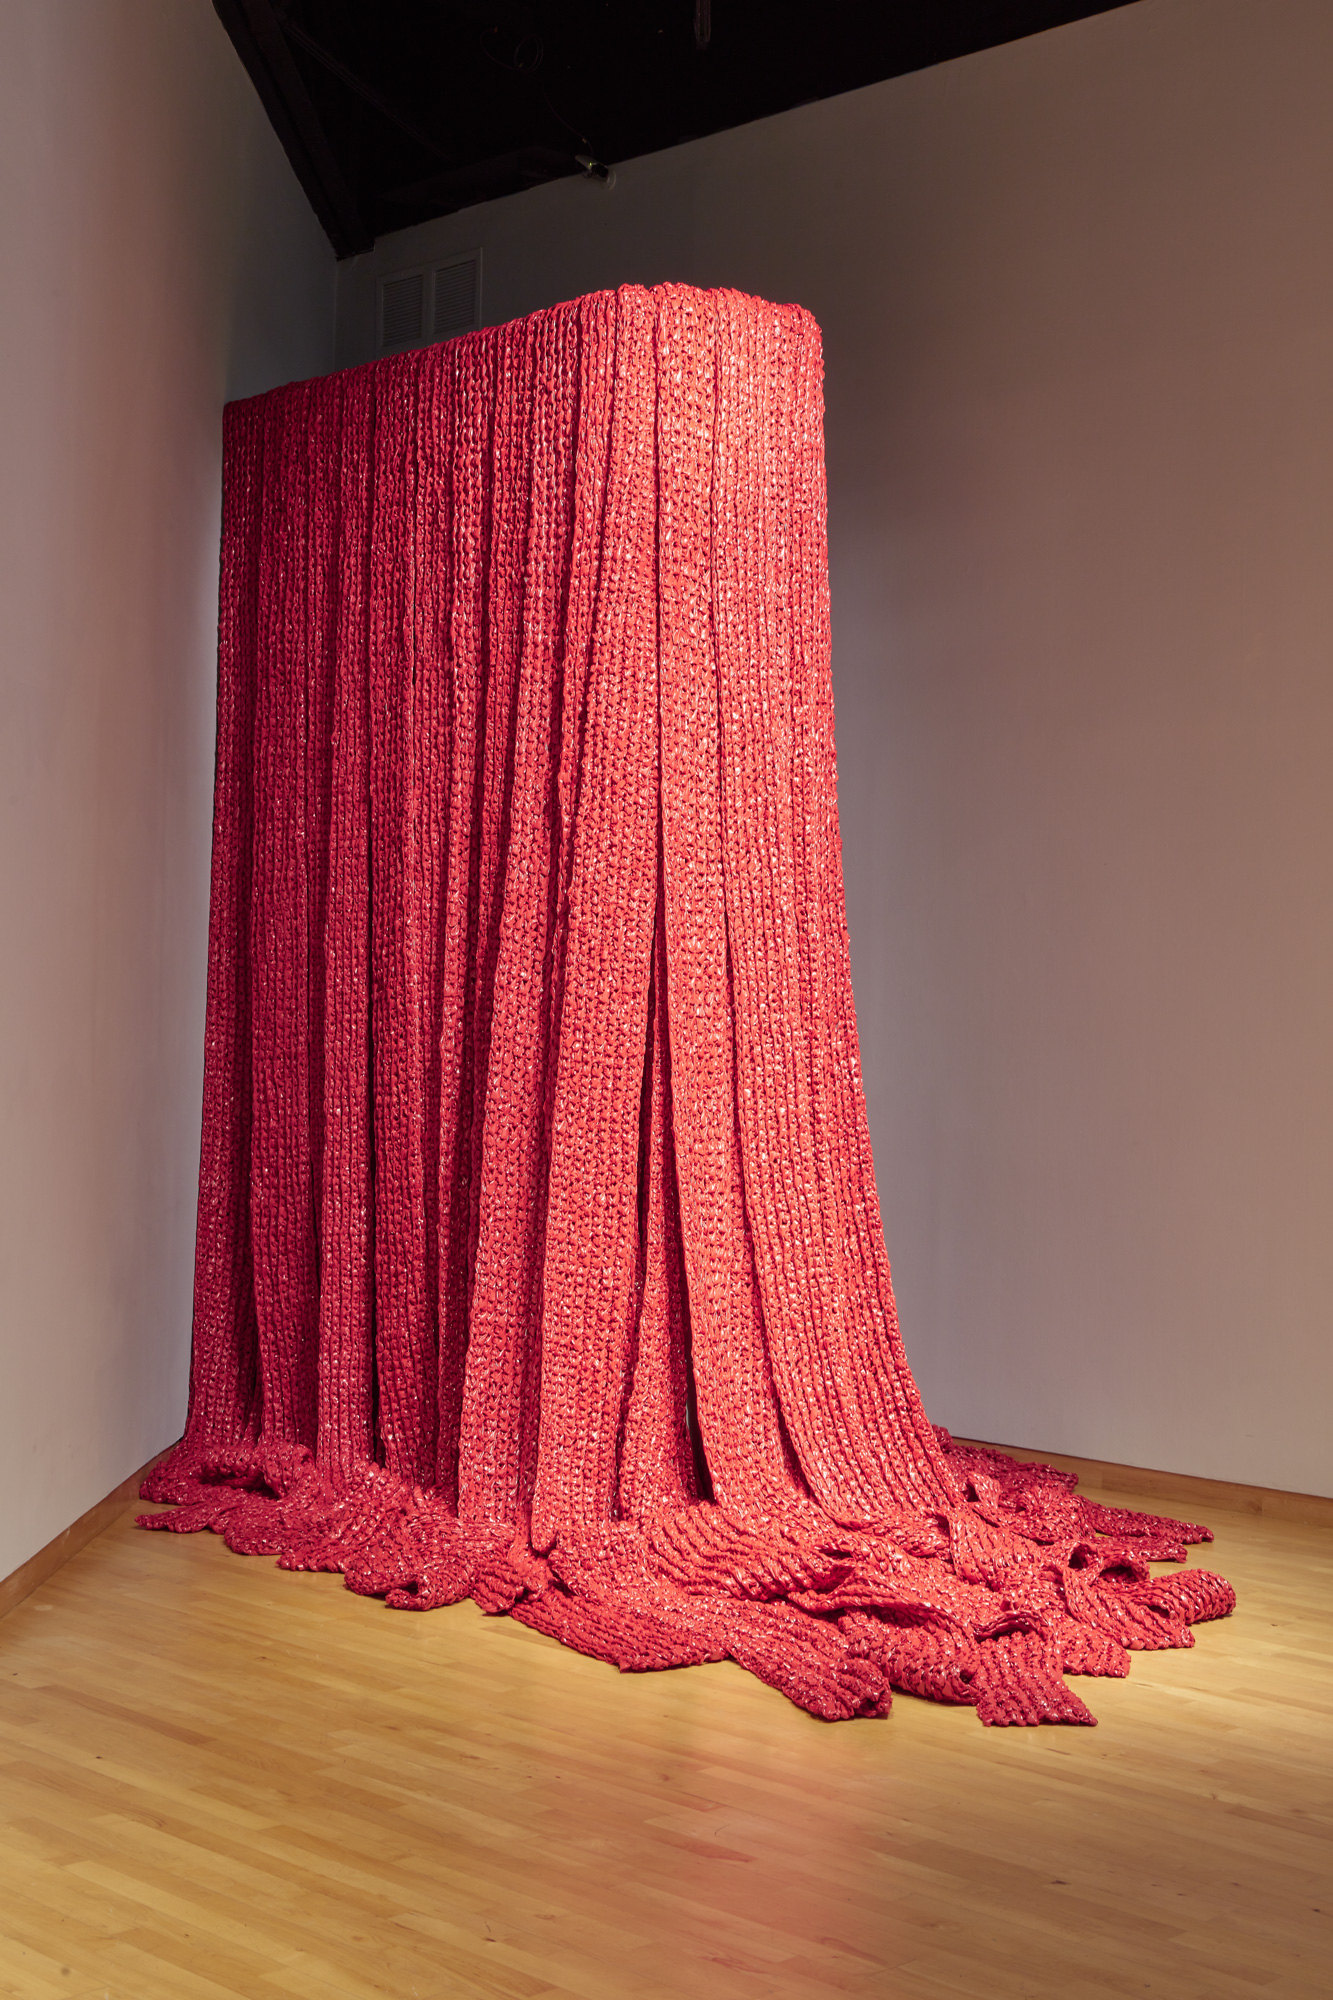 Akiko Kotani, Red Falls, 2021. crocheted polyethylene, dimensions variable. Courtesy of the artist. Installation view of Skyway 20/21 exhibition at USF Contemporary Art Museum. Photo: Will Lytch.